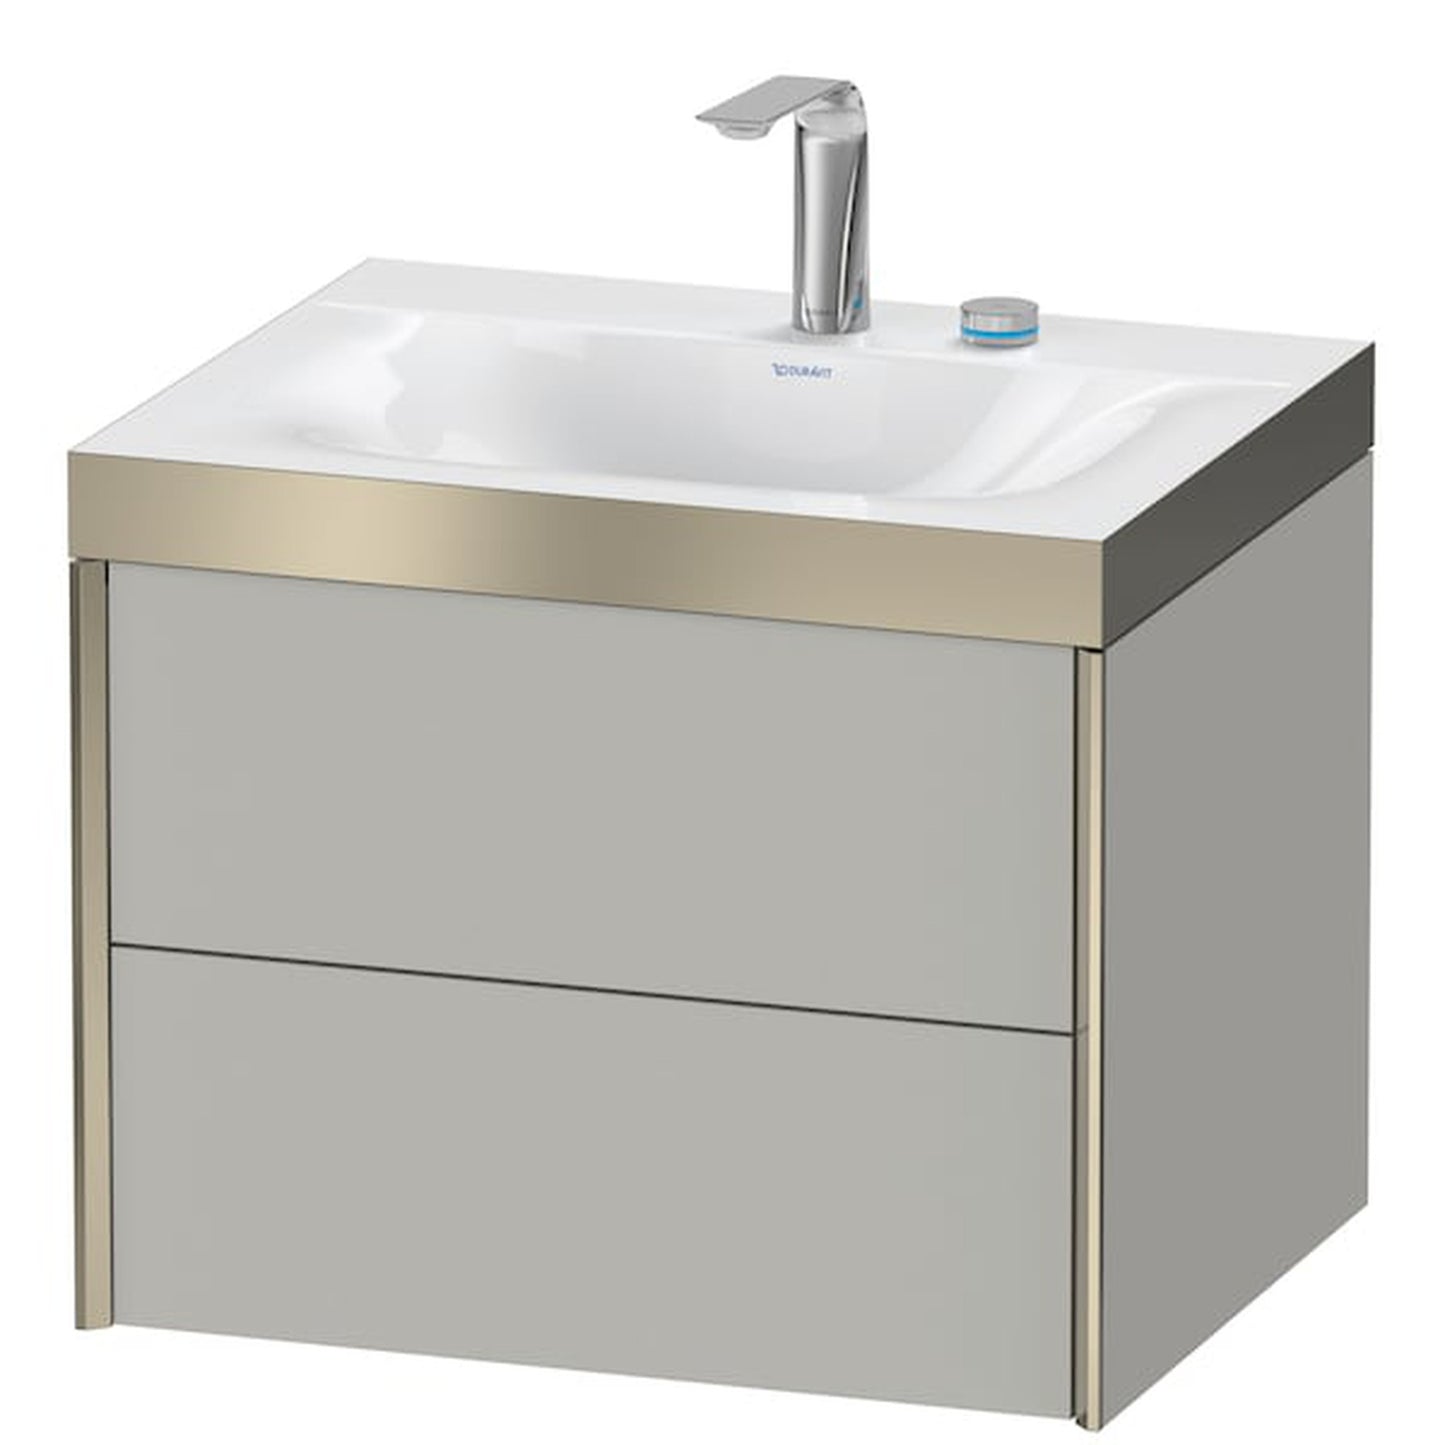 Duravit Xviu 24" x 20" x 19" Two Drawer C-Bonded Wall-Mount Vanity Kit With Two Tap Holes, Concrete Gray (XV4614EB107P)